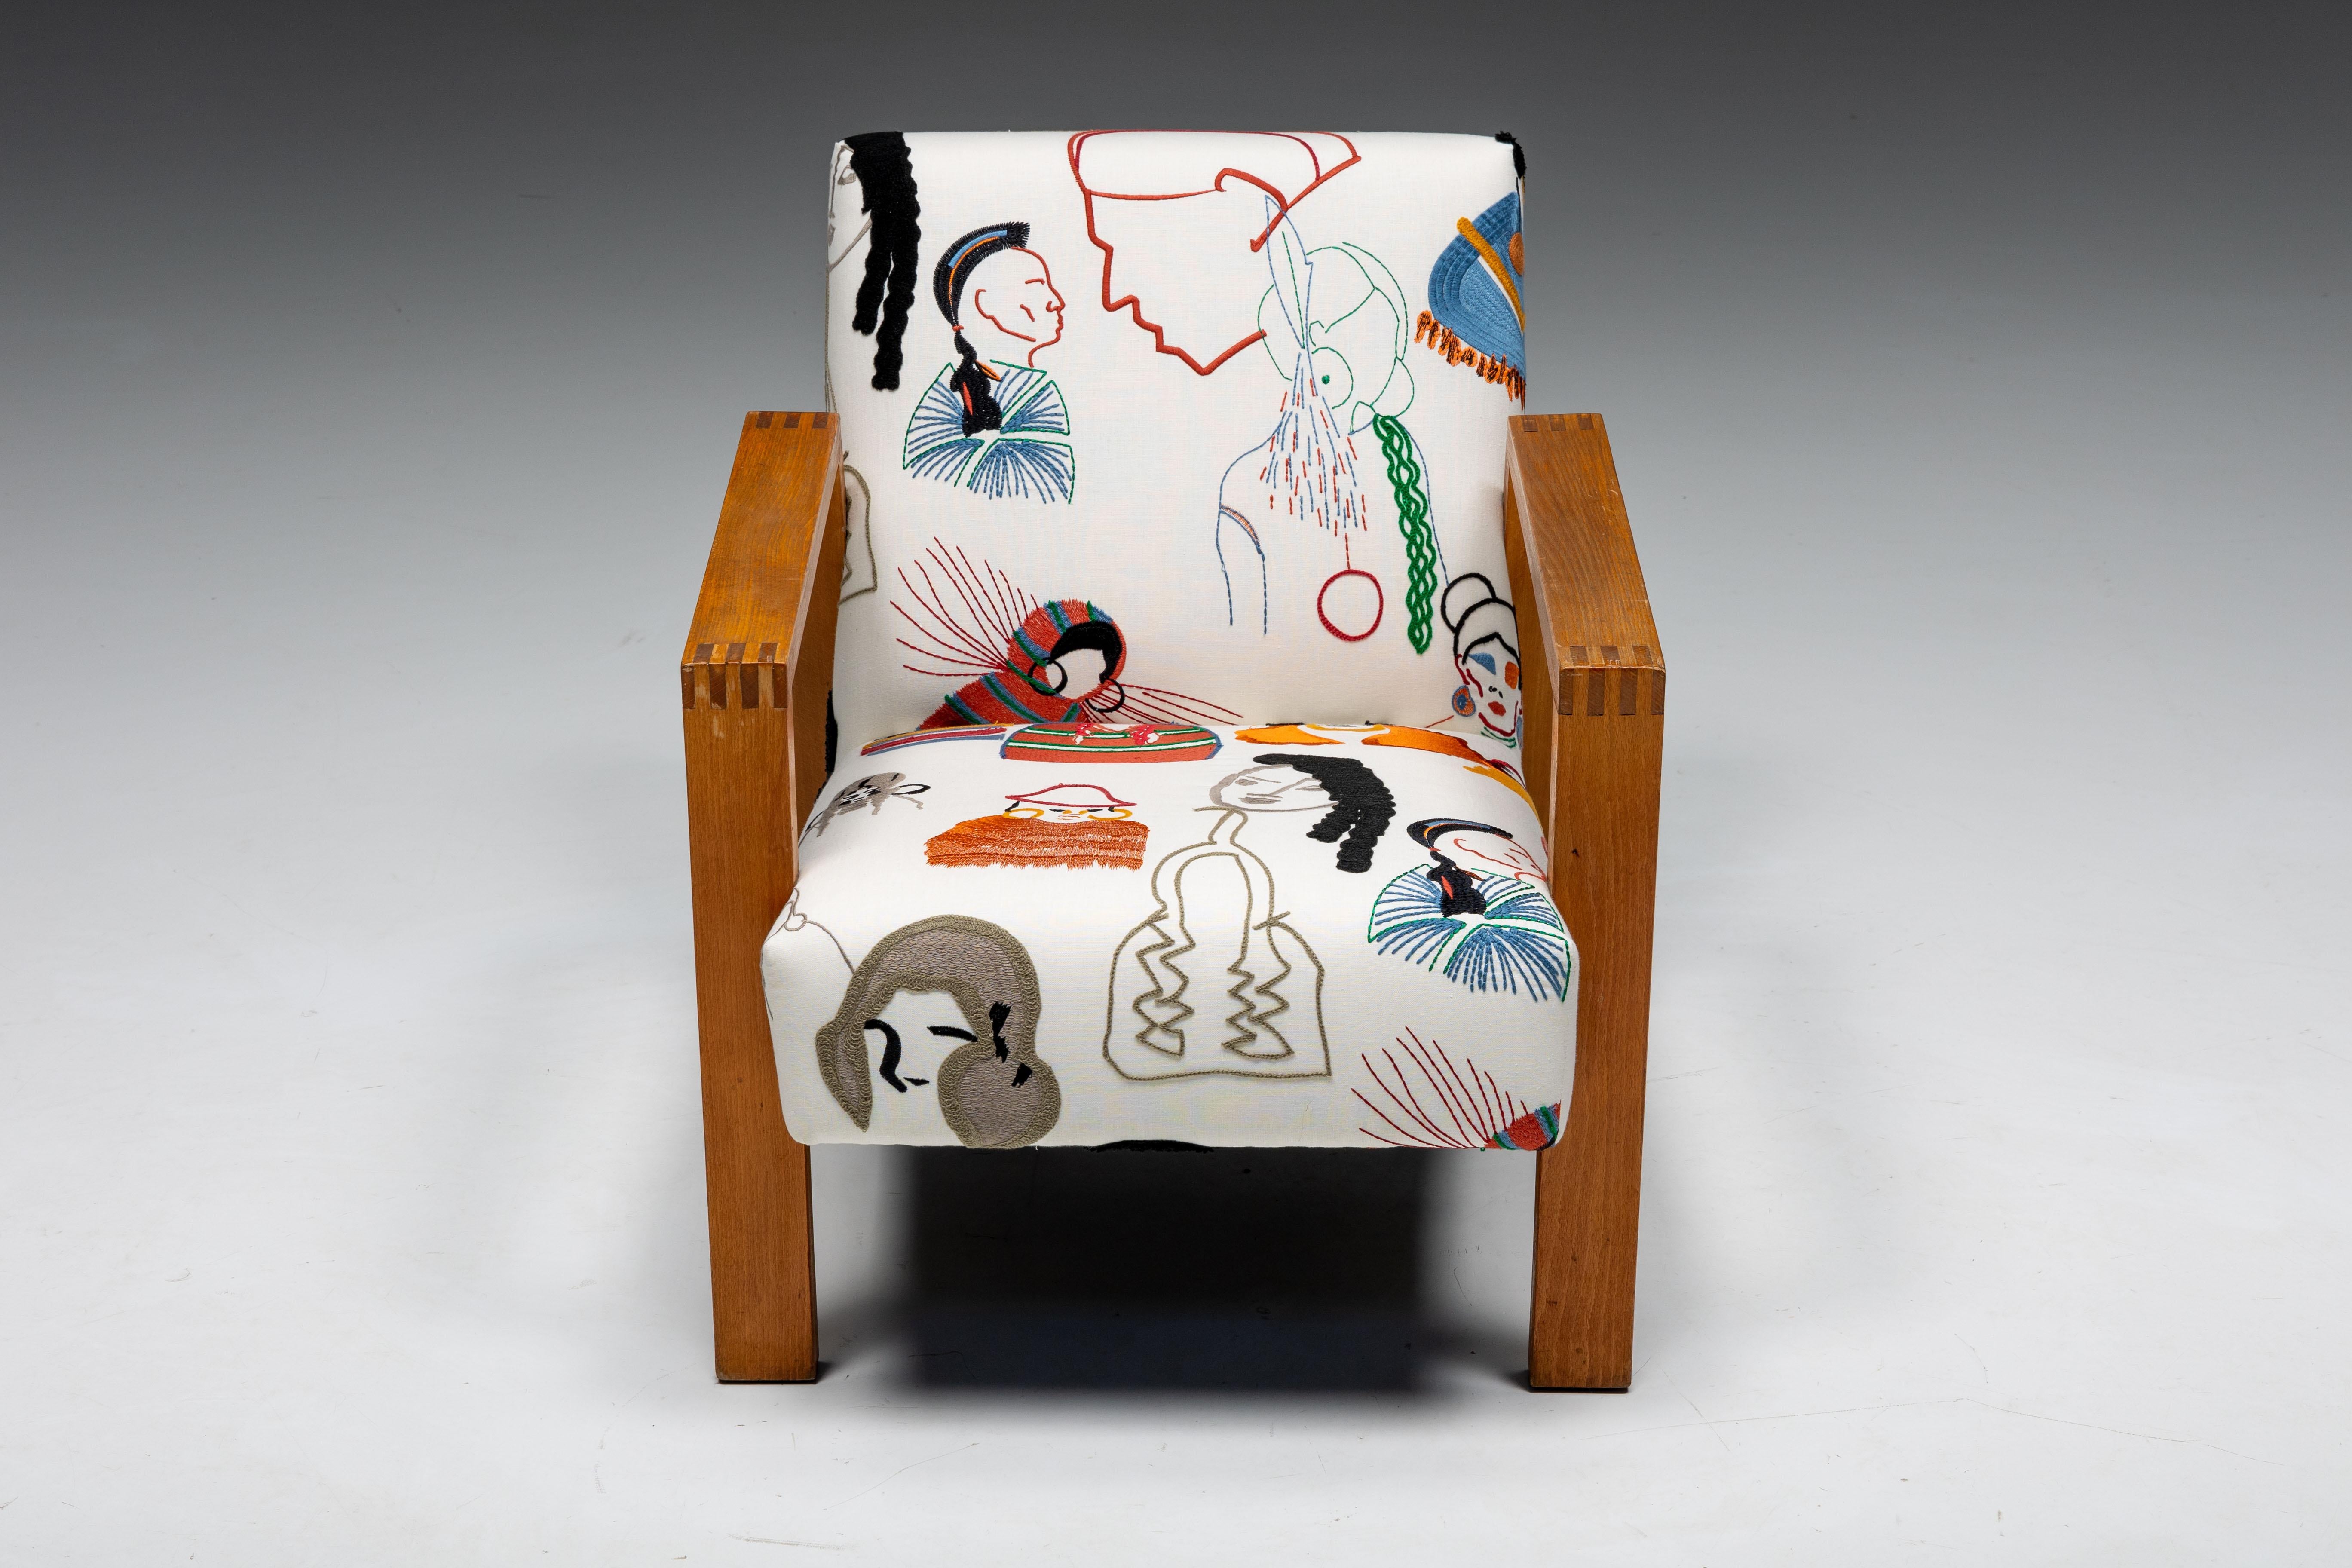 Dutch Modernism; Pierre Frey; Fabric; Wim Den Boon; Armchair; Modernist Chair; 1960s;

Dutch modernist chair, adorned with exquisite Pierre Frey fabric. This fabric, known as La Smala, is a visual delight, featuring embroidered characters with